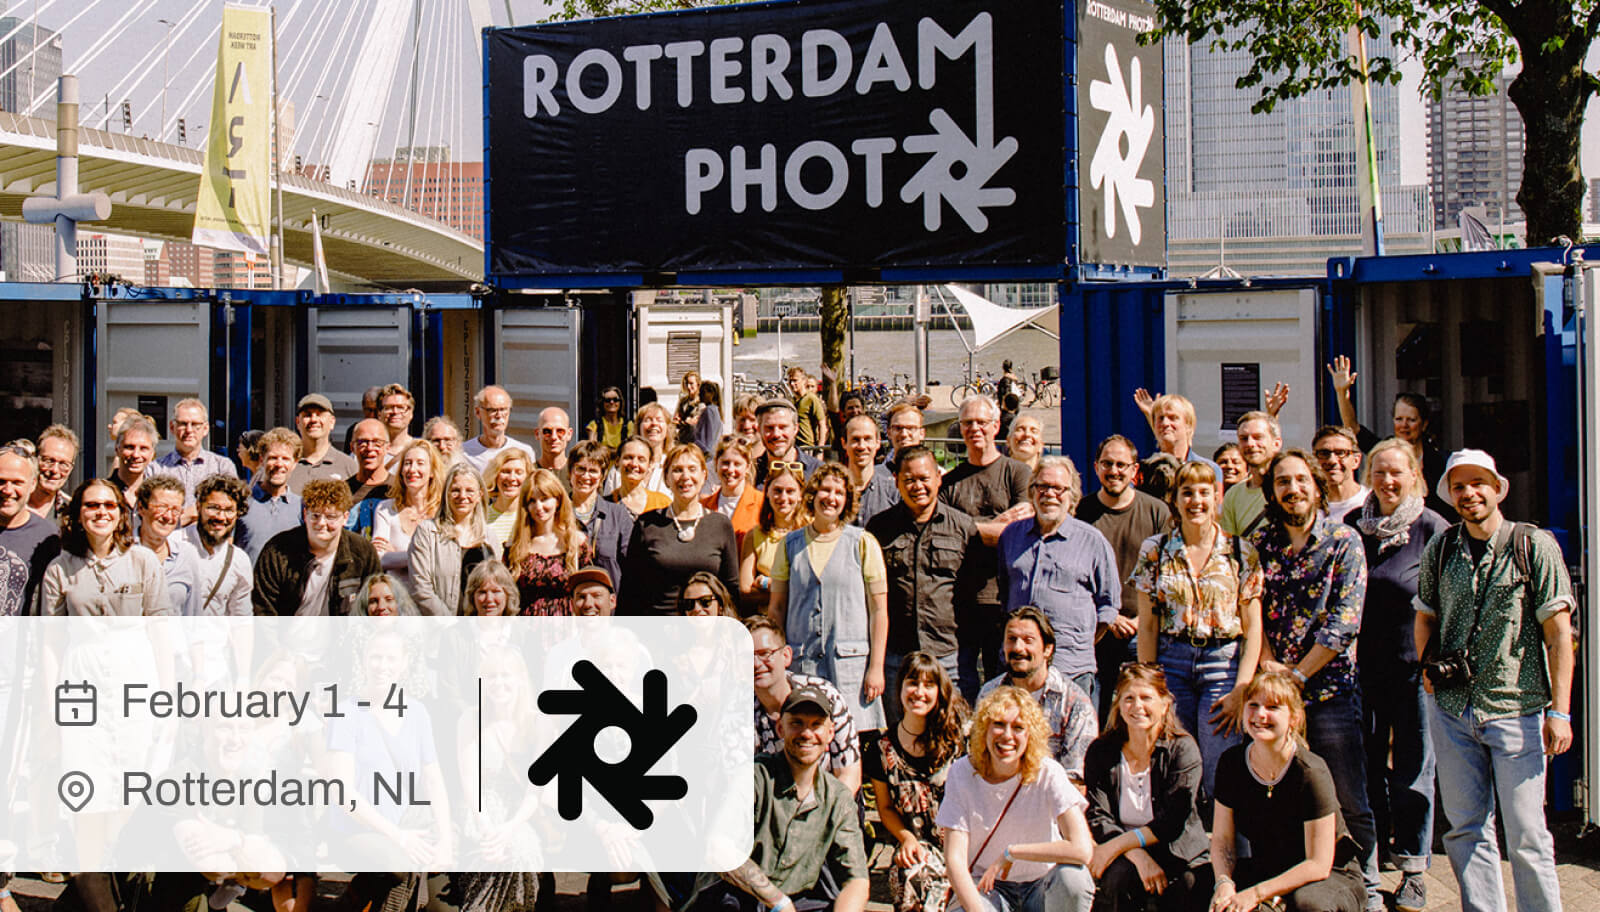 Photography event in Netherlands